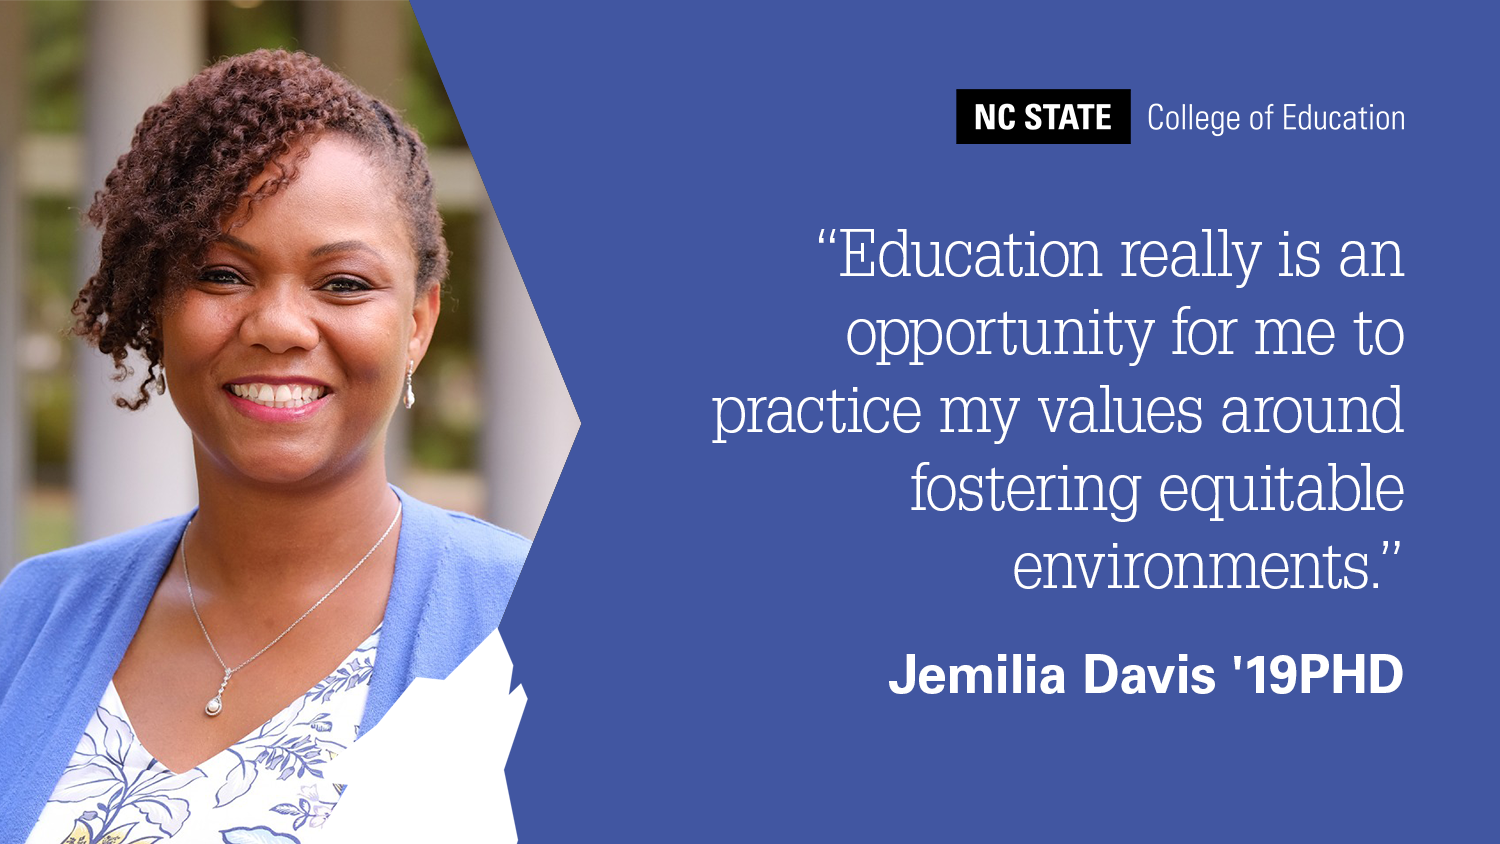 Photo of Jemilia Davis with quote: Education Really is an Opportunity For Me to Practice My Values Around Fostering Equitable Environments